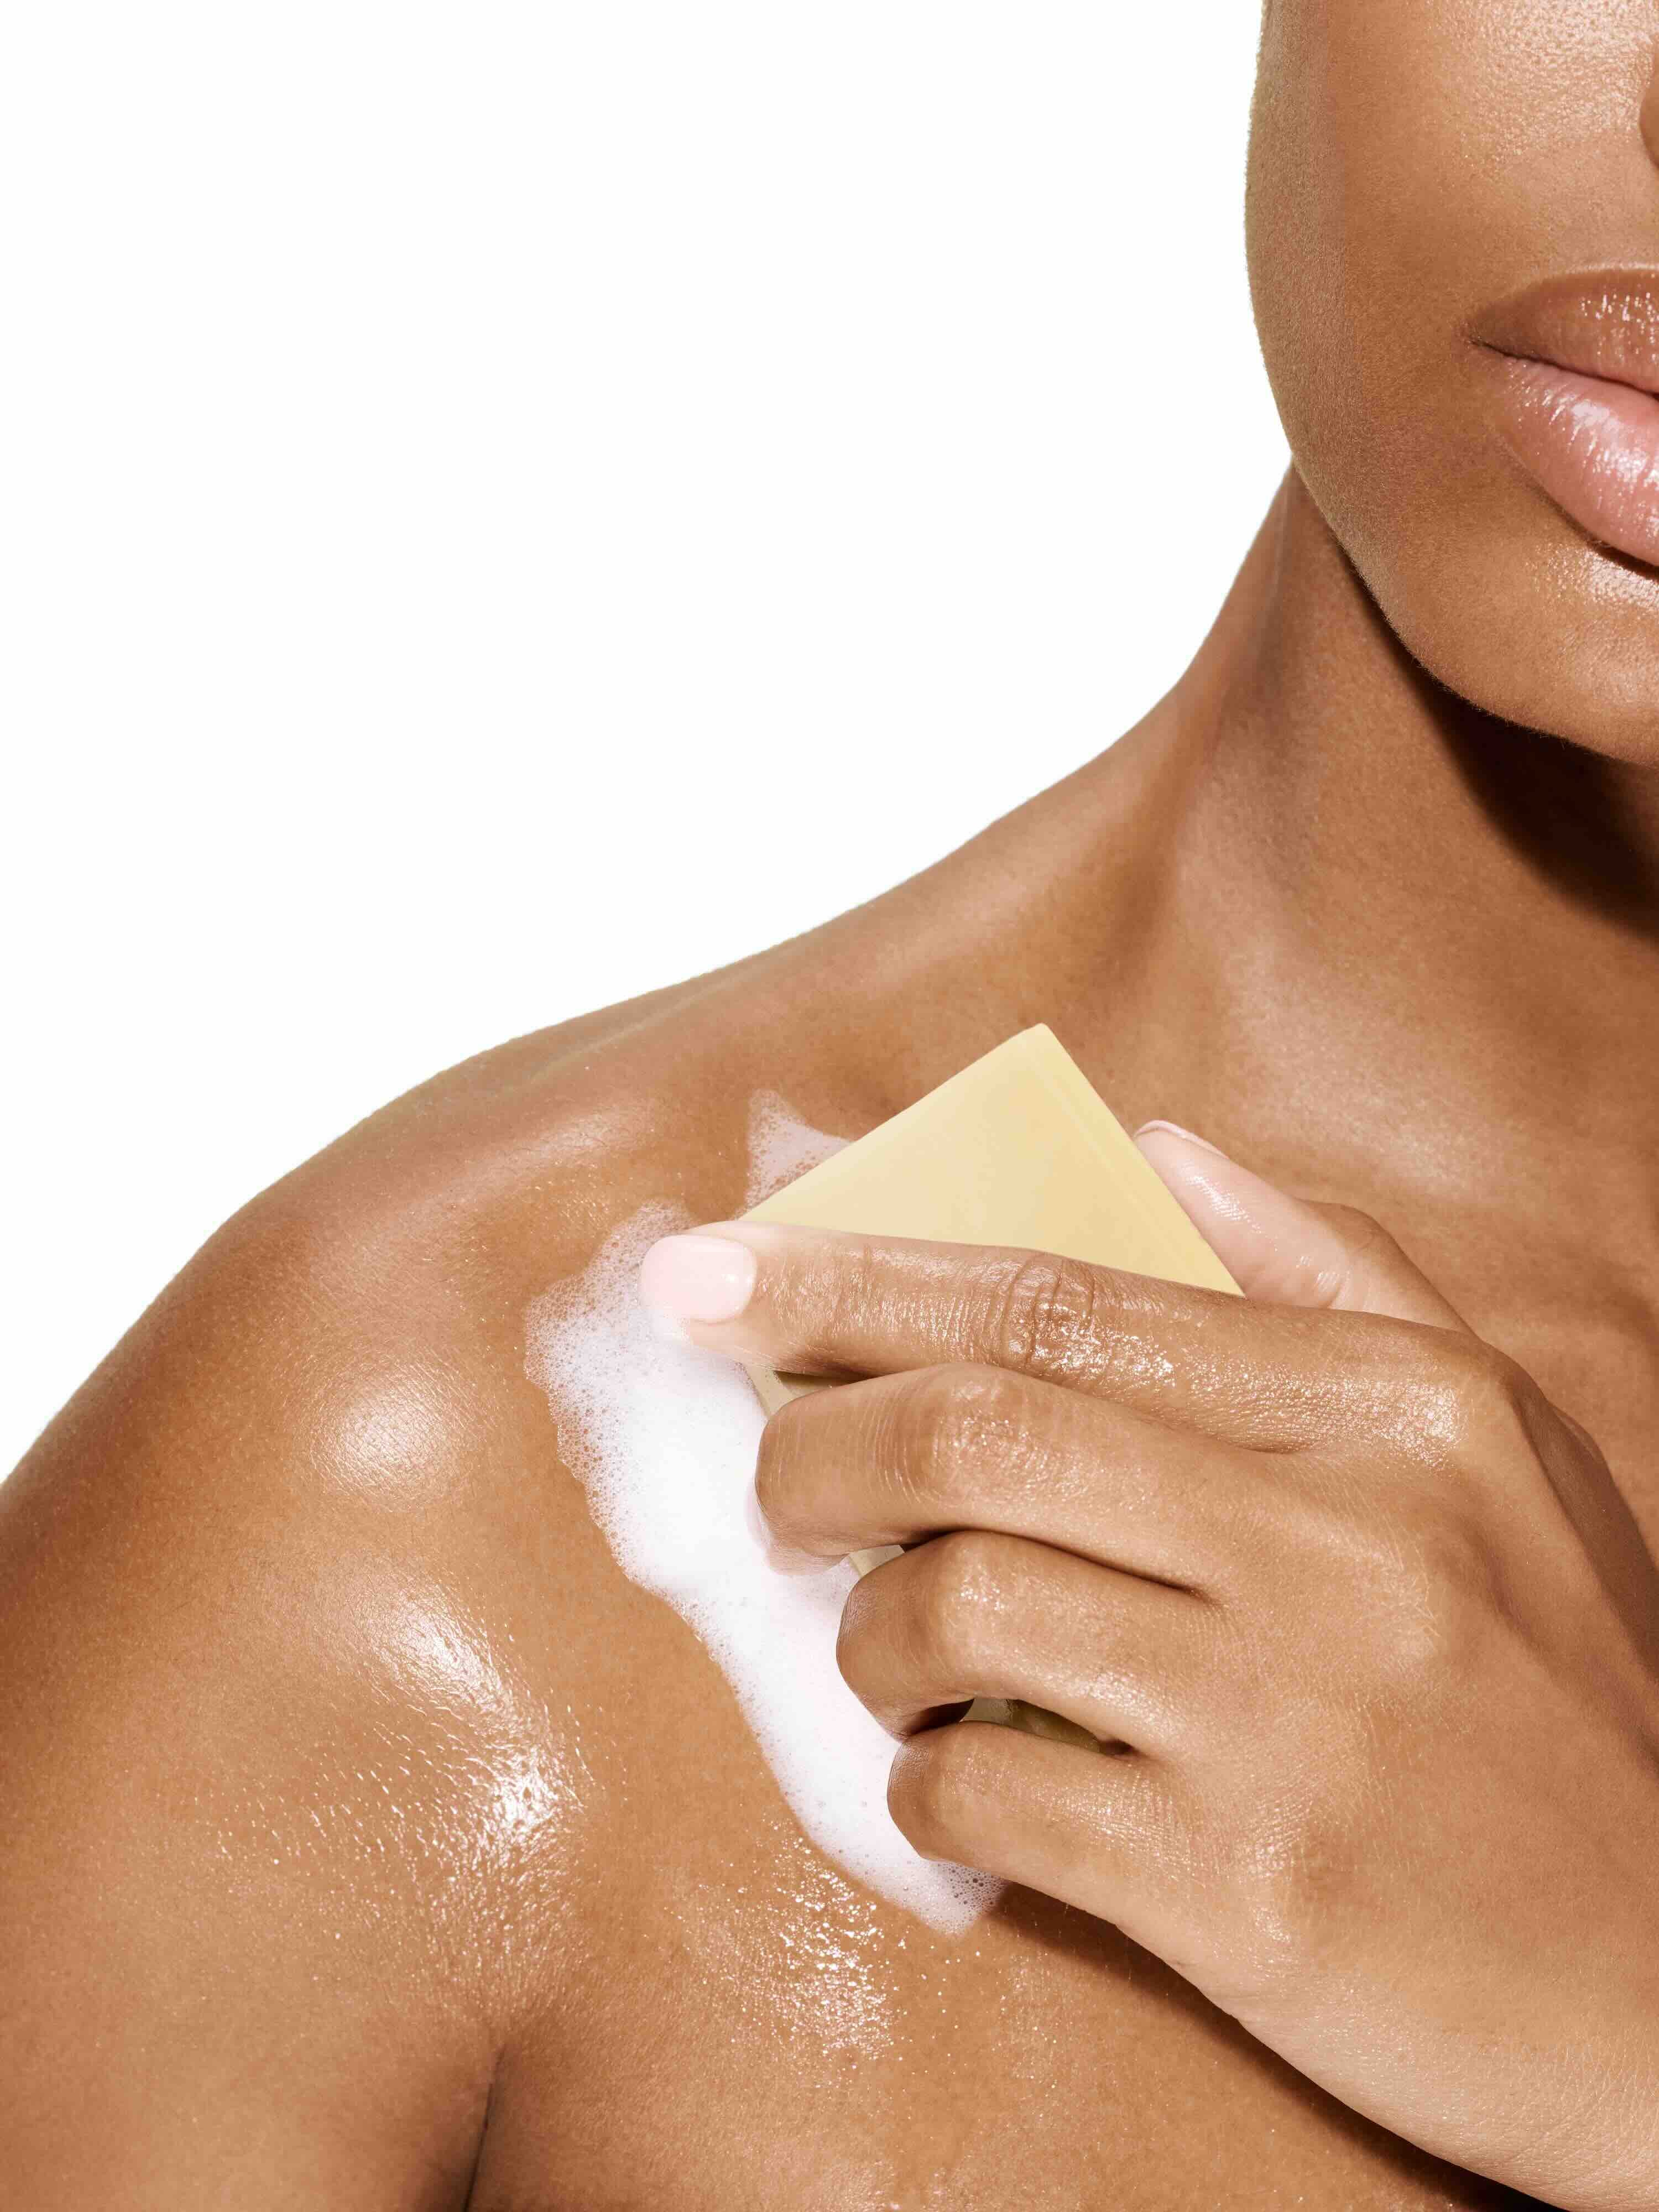 Image of a model holding a bar of soap to her skin.